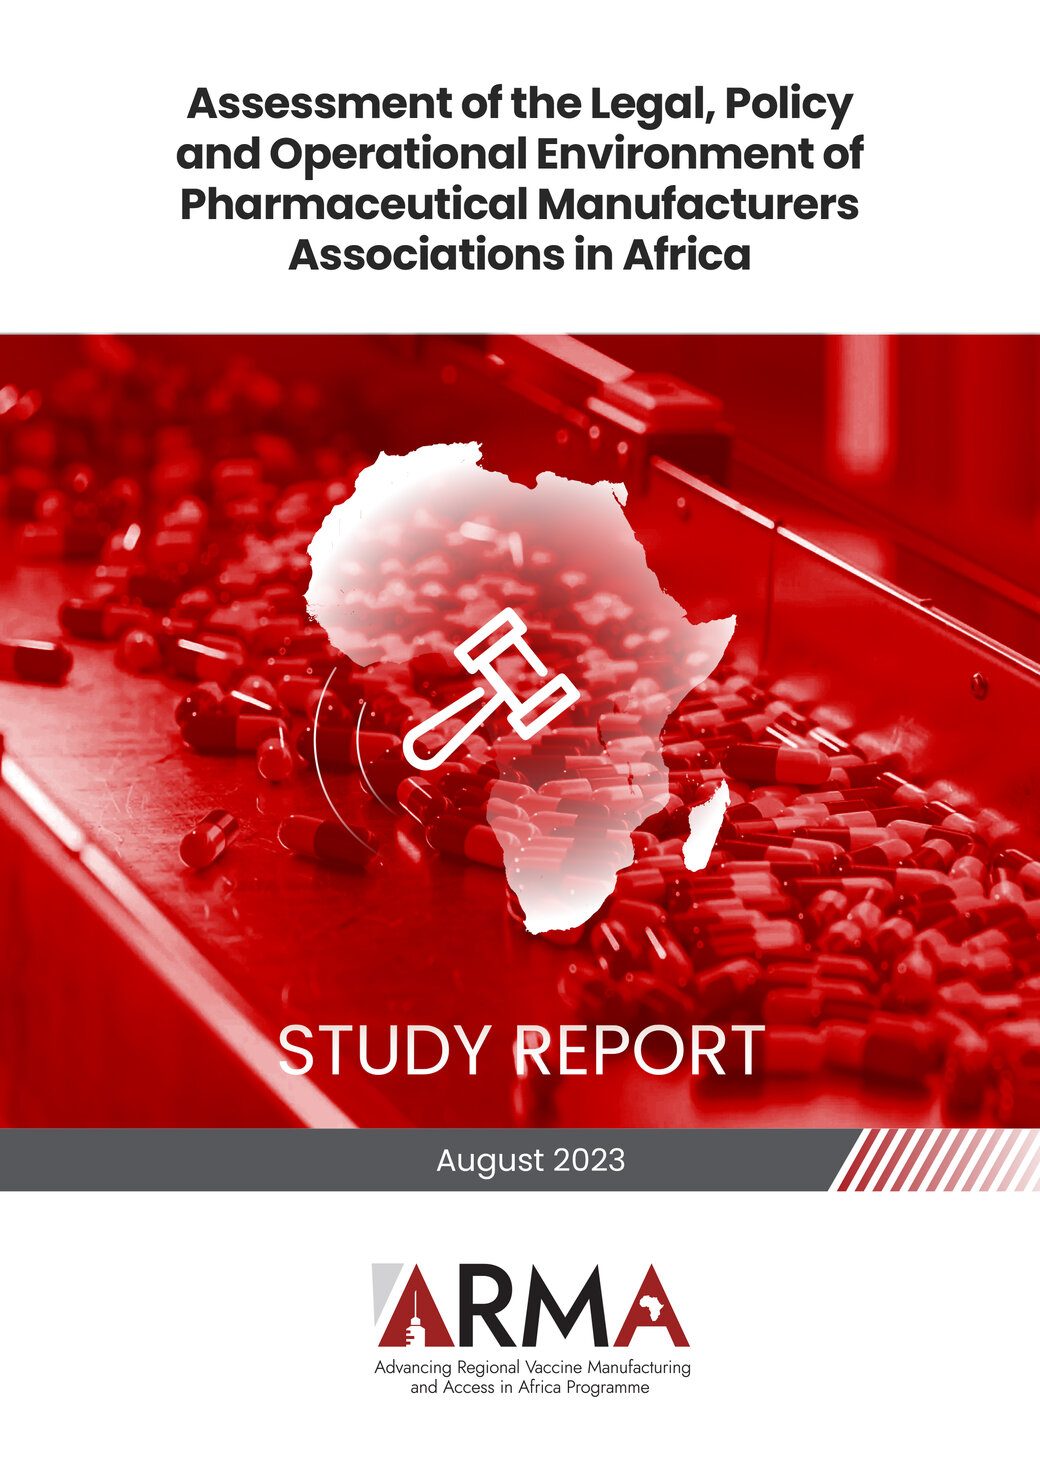 rsz_assessment_of_the_legal_policy_and_operational_environment_of_pharmaceutical_manufacturers_associations_in_africa-1